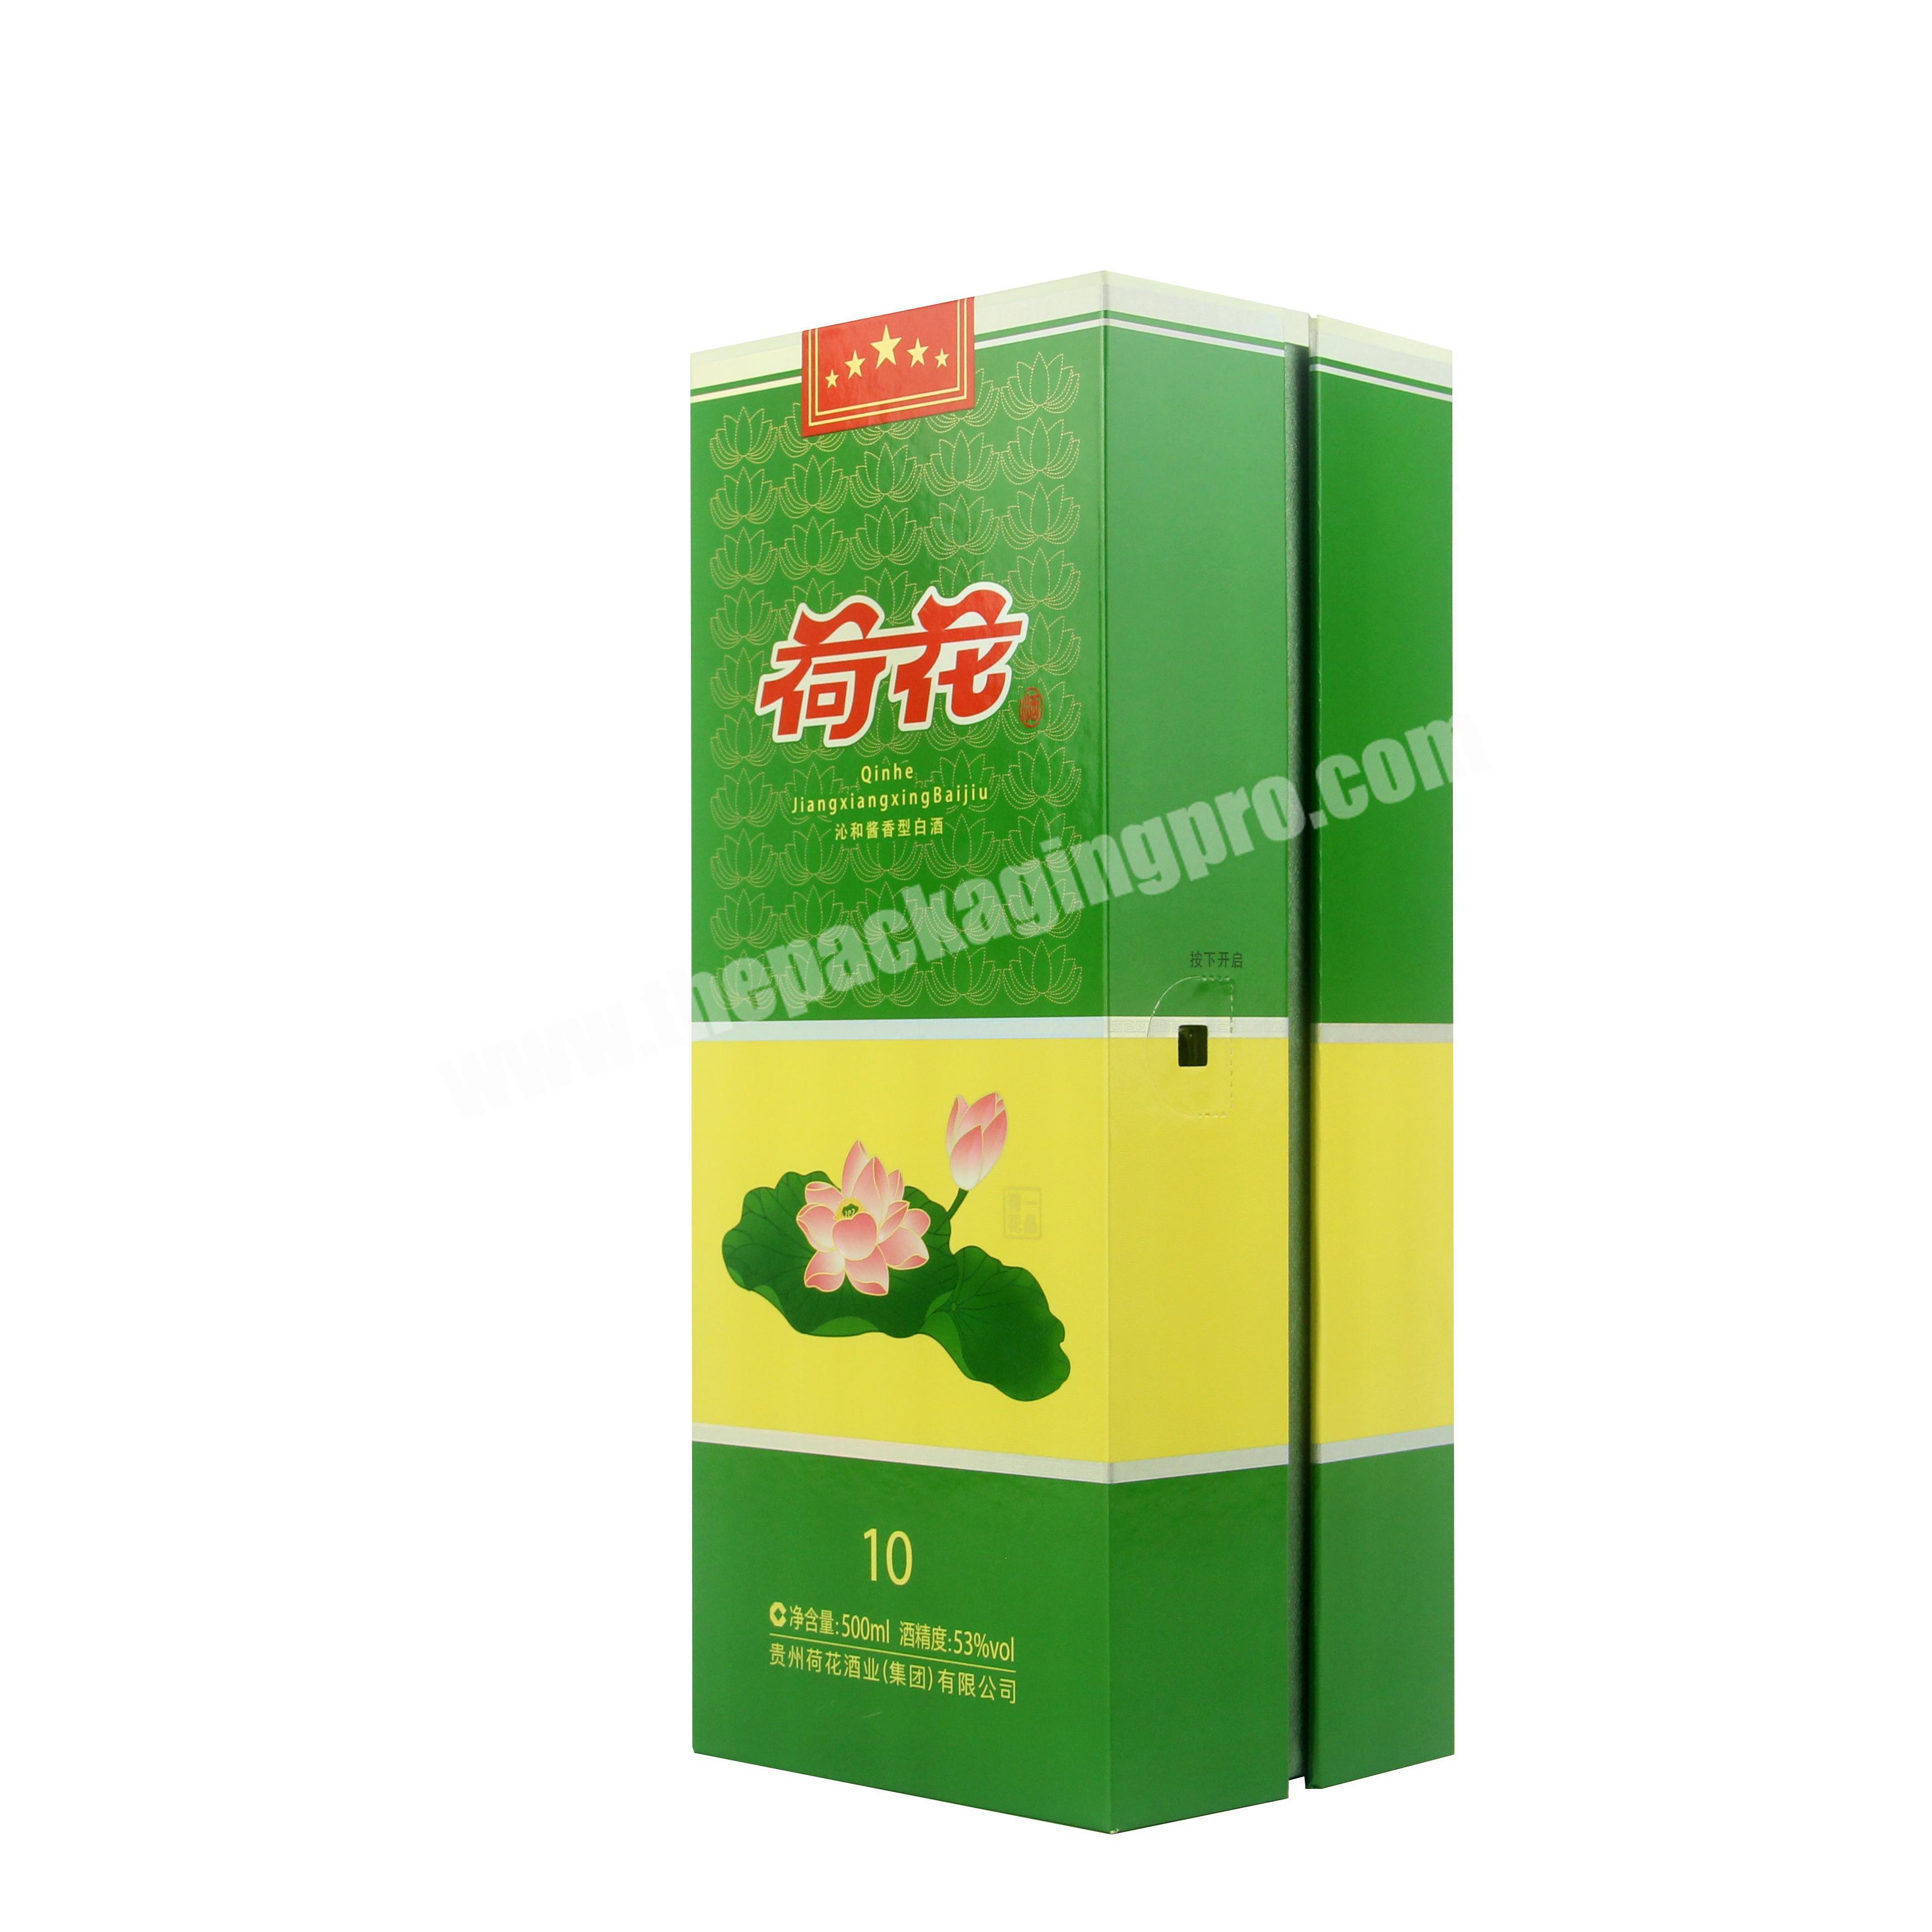 Gift box for wine recyclable premium cardboard wine box packaging with cartons